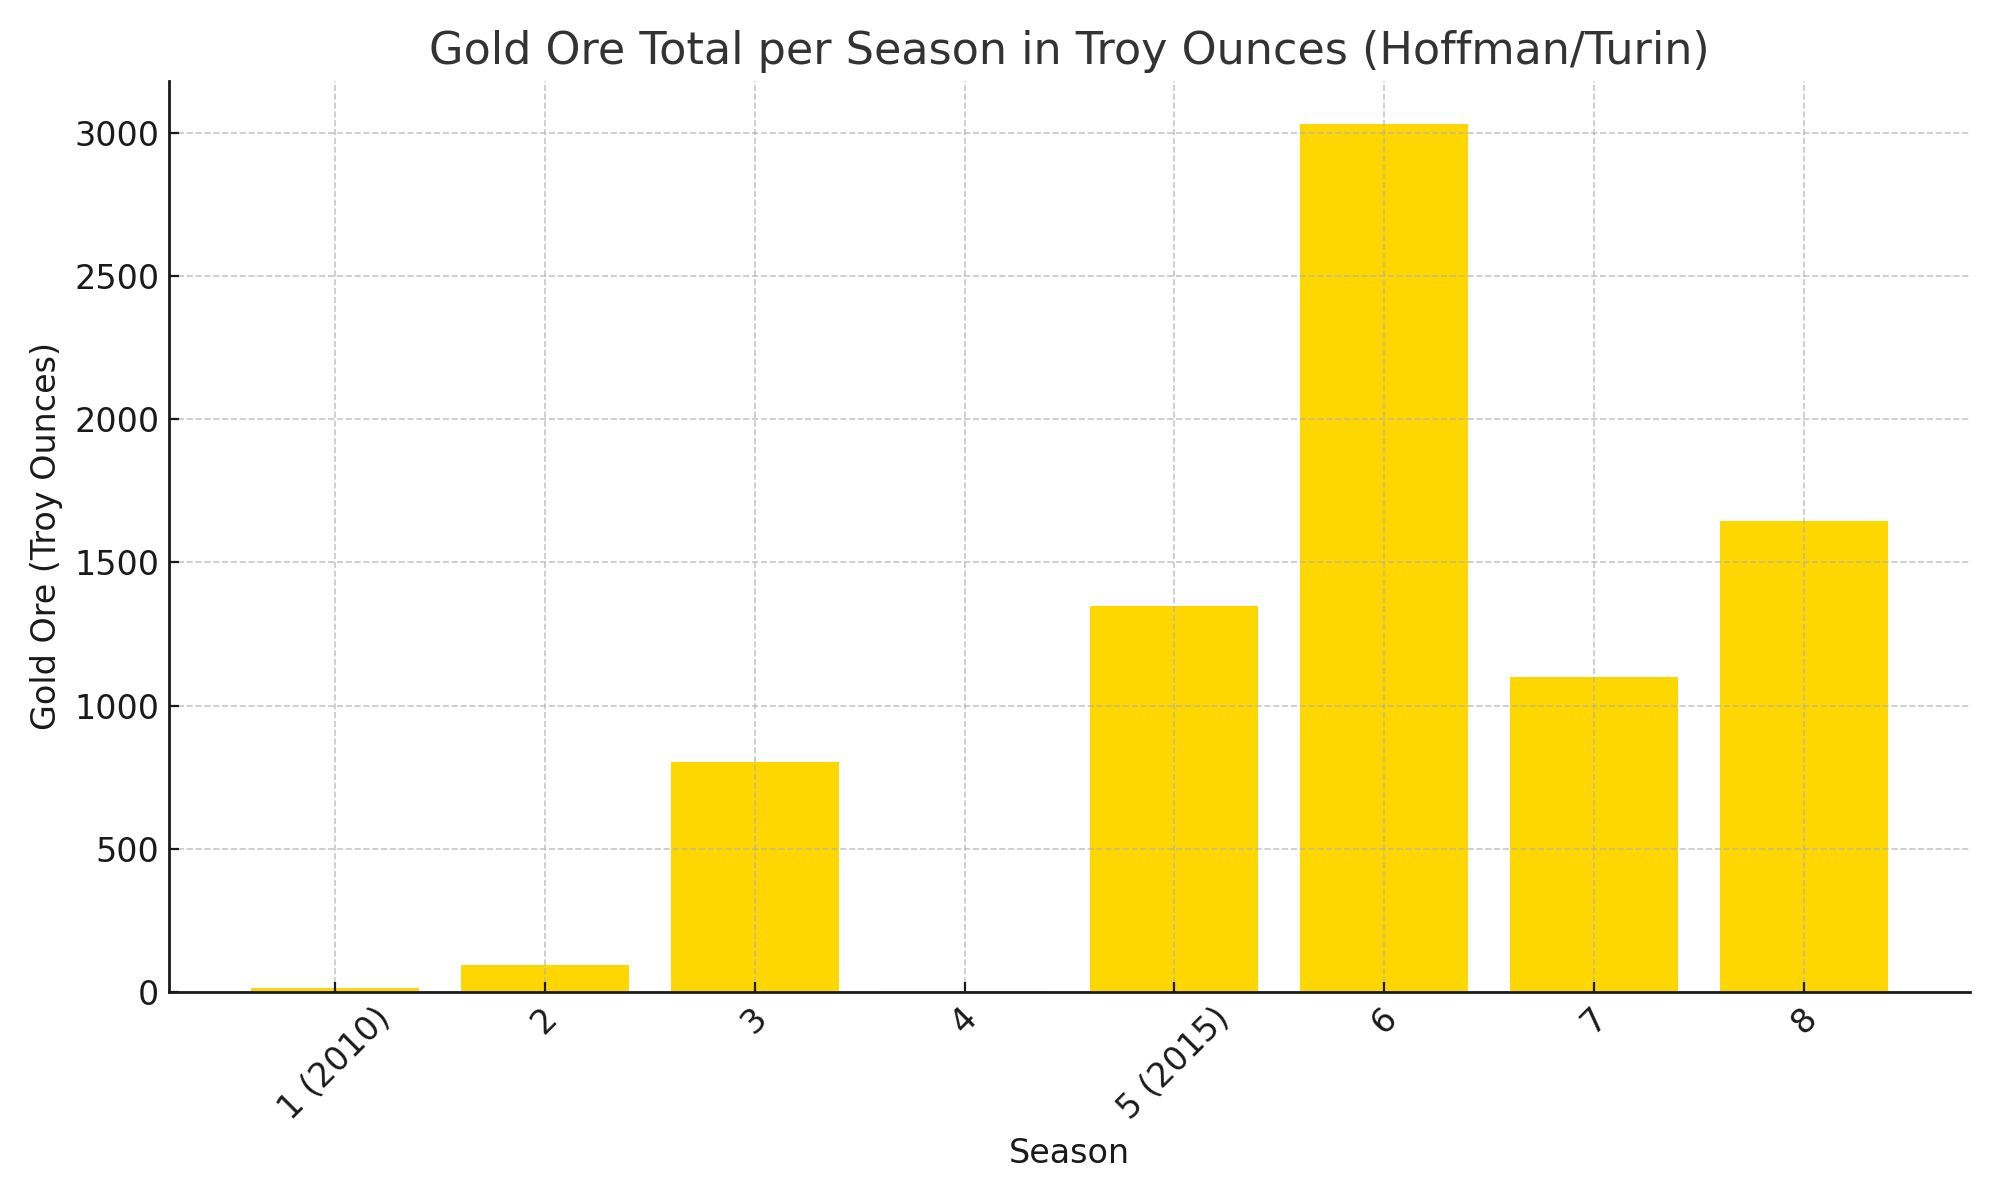 How much gold Todd Hoffman mined on Gold Rush by season